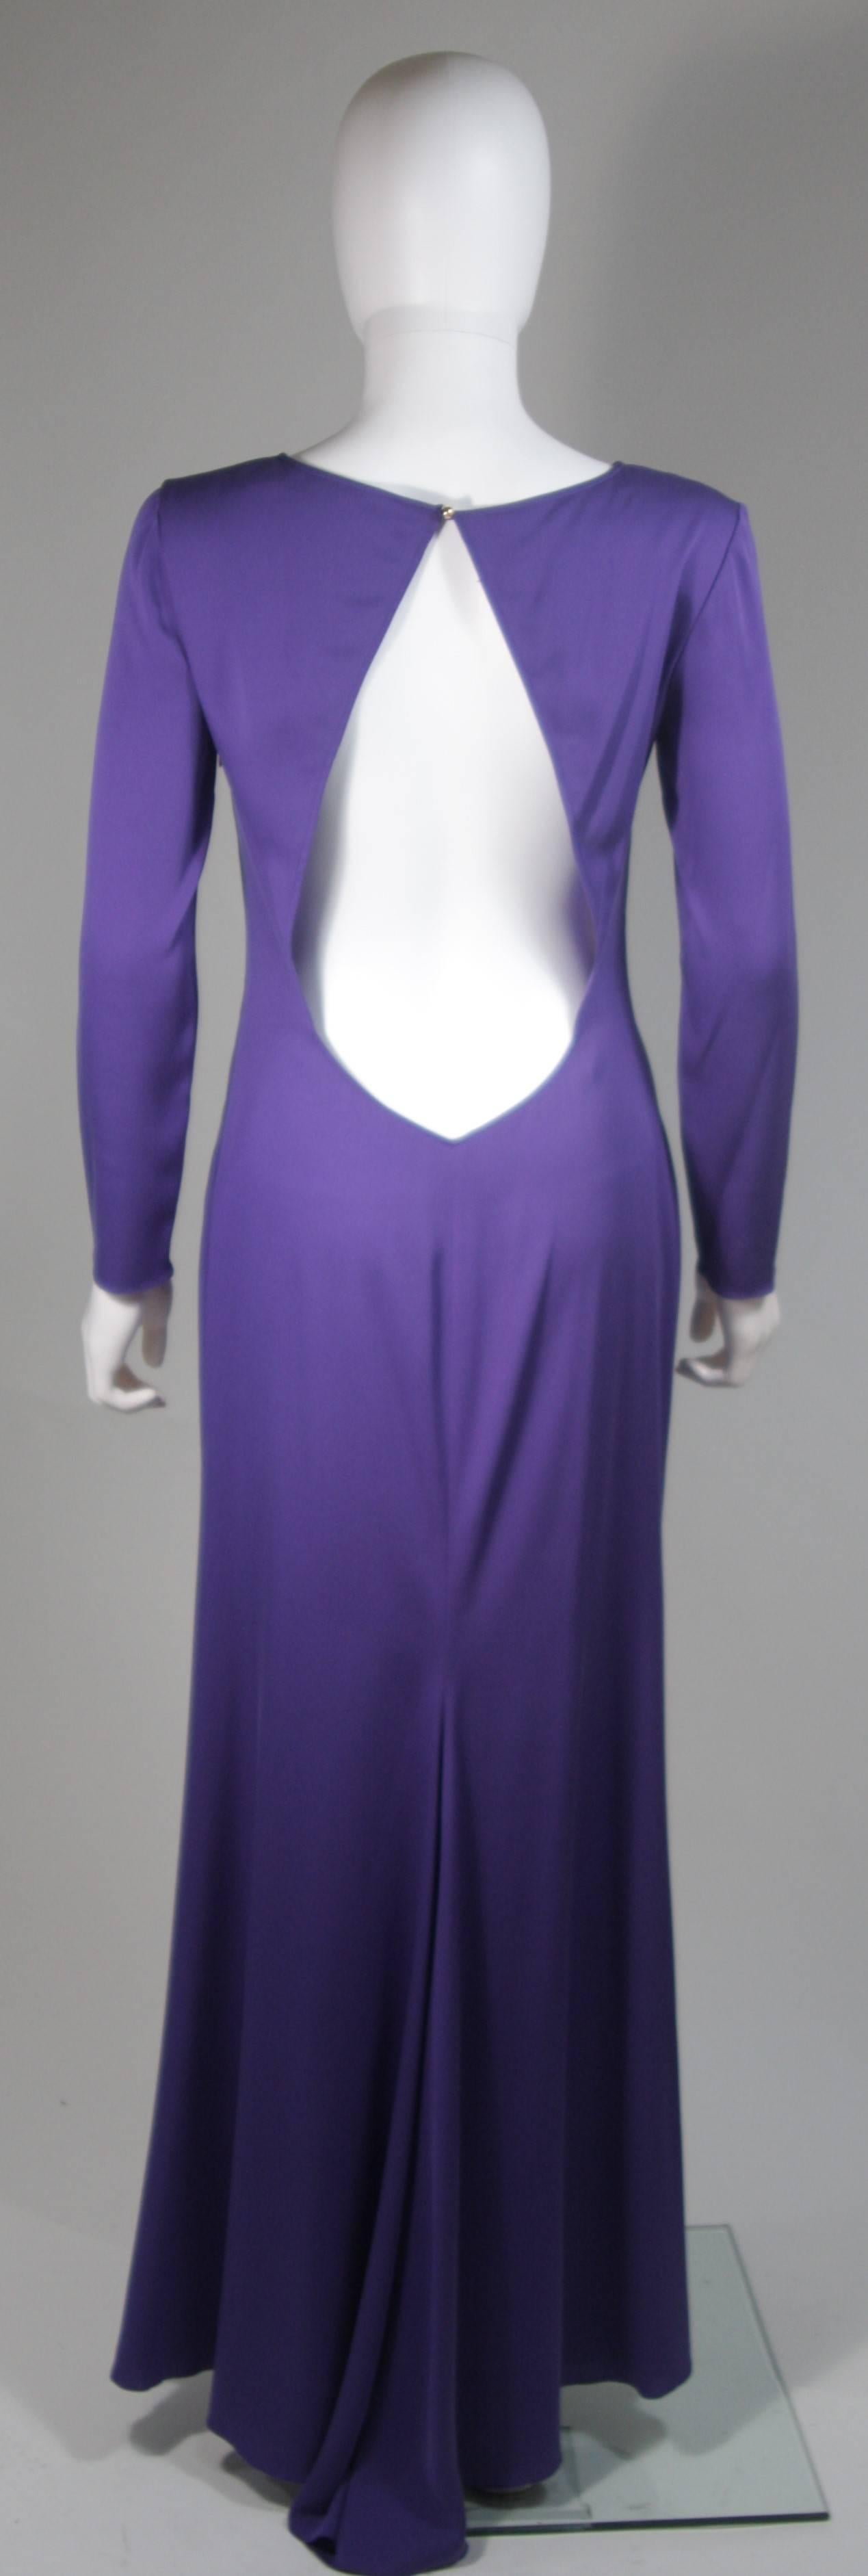 Women's Emilio Pucci Purple Silk Long Sleeve Gown with Open Back Size Medium Large For Sale